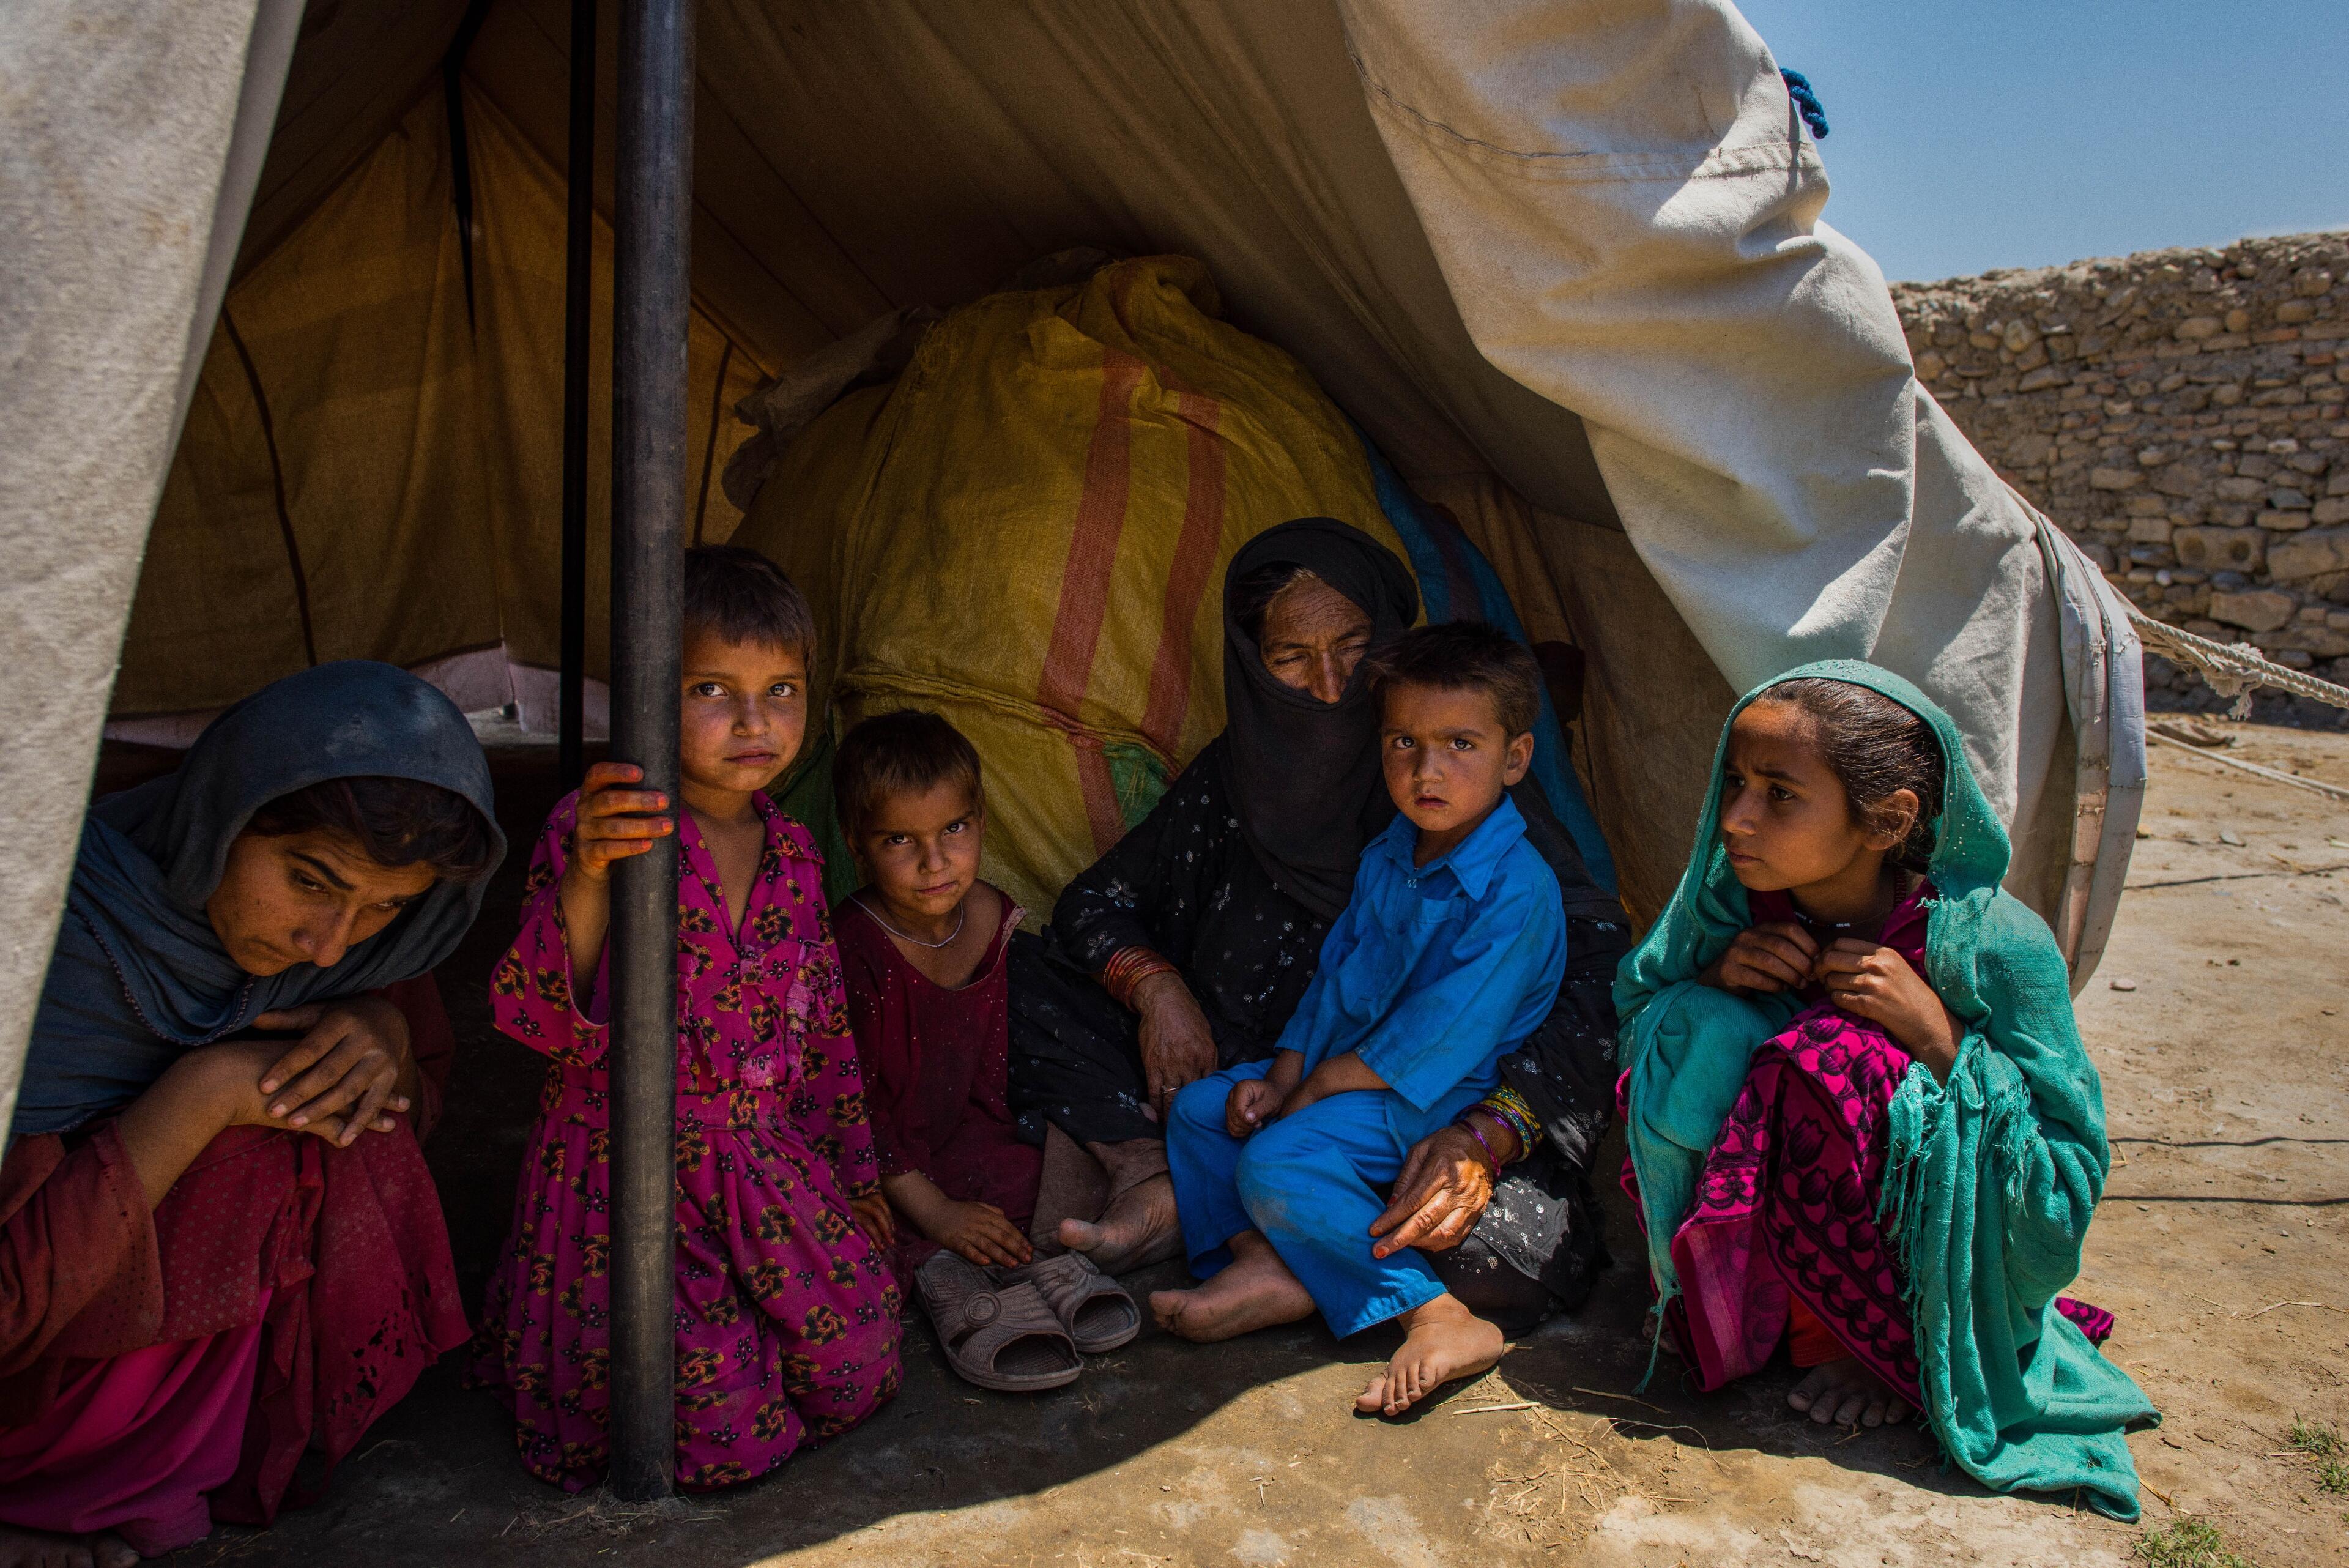 Women and children from an Afghan family living in a displacement camp sit inside the shade of their tent in an arid landscape.